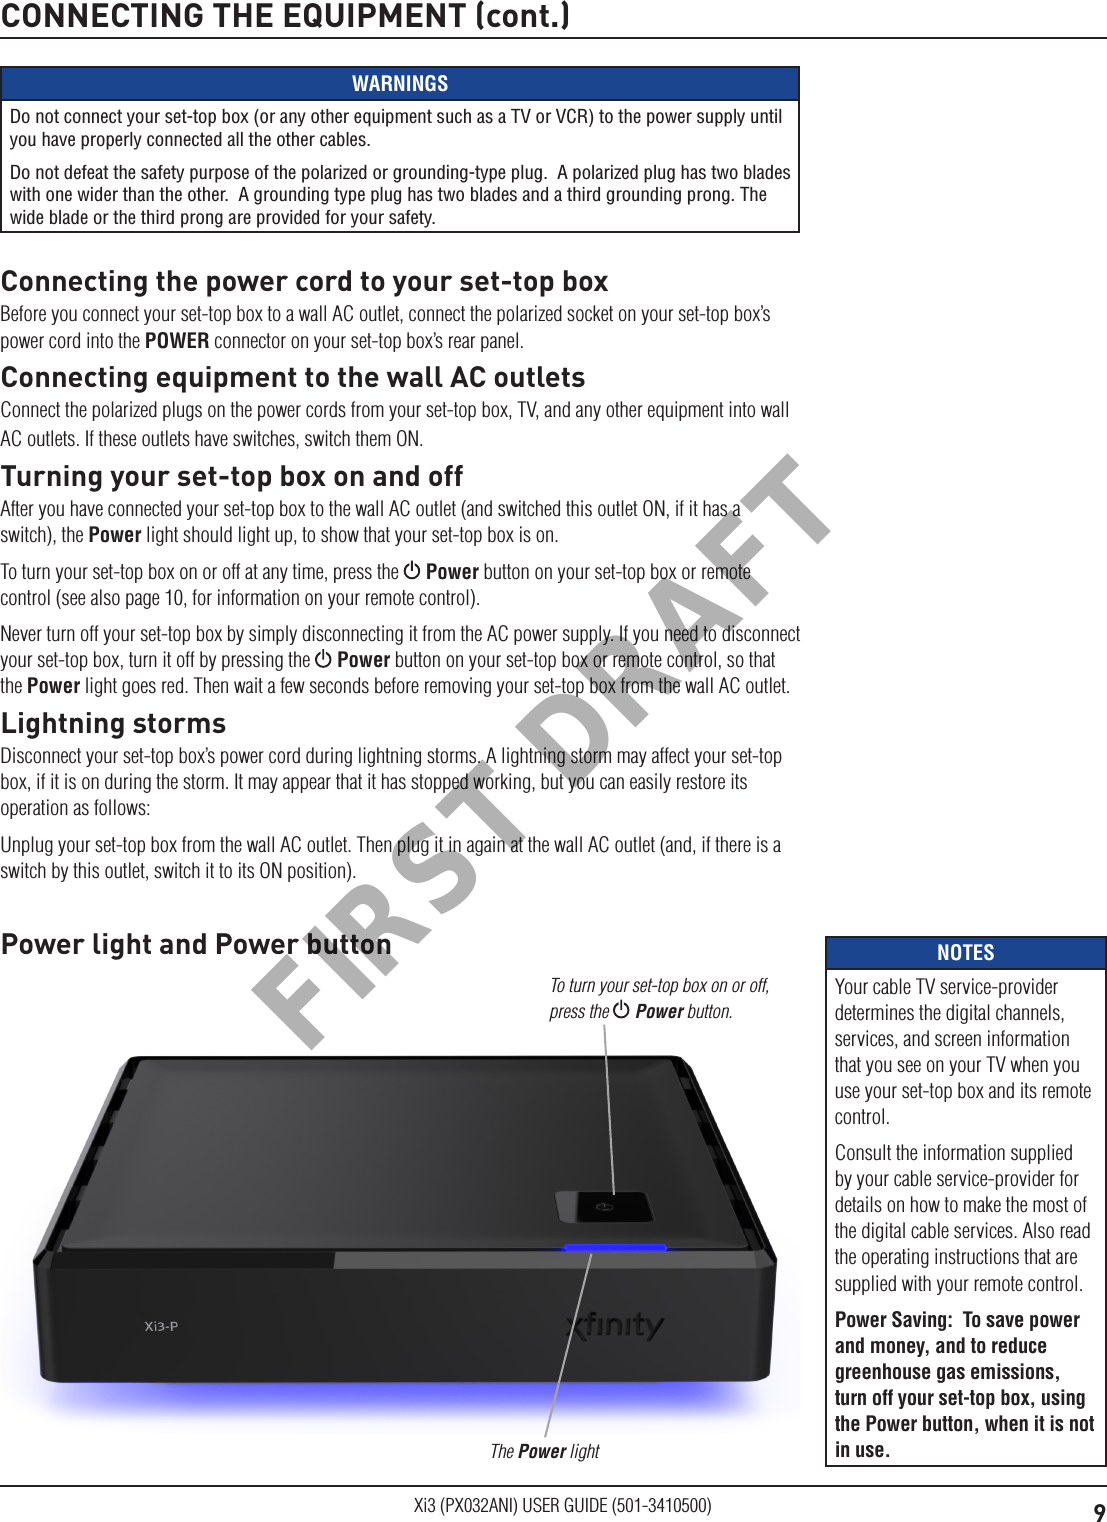 9Xi3 (PX032ANI) USER GUIDE (501-3410500)CONNECTING THE EQUIPMENT (cont.)WARNINGSDo not connect your set-top box (or any other equipment such as a TV or VCR) to the power supply until you have properly connected all the other cables.Do not defeat the safety purpose of the polarized or grounding-type plug.  A polarized plug has two blades with one wider than the other.  A grounding type plug has two blades and a third grounding prong. The wide blade or the third prong are provided for your safety. Connecting the power cord to your set-top boxBefore you connect your set-top box to a wall AC outlet, connect the polarized socket on your set-top box’s power cord into the POWER connector on your set-top box’s rear panel.Connecting equipment to the wall AC outletsConnect the polarized plugs on the power cords from your set-top box, TV, and any other equipment into wall AC outlets. If these outlets have switches, switch them ON.Turning your set-top box on and offAfter you have connected your set-top box to the wall AC outlet (and switched this outlet ON, if it has a switch), the Power light should light up, to show that your set-top box is on.To turn your set-top box on or off at any time, press the   Power button on your set-top box or remote control (see also page 10, for information on your remote control).Never turn off your set-top box by simply disconnecting it from the AC power supply. If you need to disconnect your set-top box, turn it off by pressing the   Power button on your set-top box or remote control, so that the Power light goes red. Then wait a few seconds before removing your set-top box from the wall AC outlet.Lightning stormsDisconnect your set-top box’s power cord during lightning storms. A lightning storm may affect your set-top box, if it is on during the storm. It may appear that it has stopped working, but you can easily restore its operation as follows:Unplug your set-top box from the wall AC outlet. Then plug it in again at the wall AC outlet (and, if there is a switch by this outlet, switch it to its ON position).Power light and Power buttonThe Power lightTo turn your set-top box on or off, press the  Power button.NOTESYour cable TV service-provider determines the digital channels, services, and screen information that you see on your TV when you use your set-top box and its remote control.Consult the information supplied by your cable service-provider for details on how to make the most of the digital cable services. Also read the operating instructions that are supplied with your remote control.Power Saving:  To save power and money, and to reduce greenhouse gas emissions, turn off your set-top box, using the Power button, when it is not in use.FIRST DRAFT